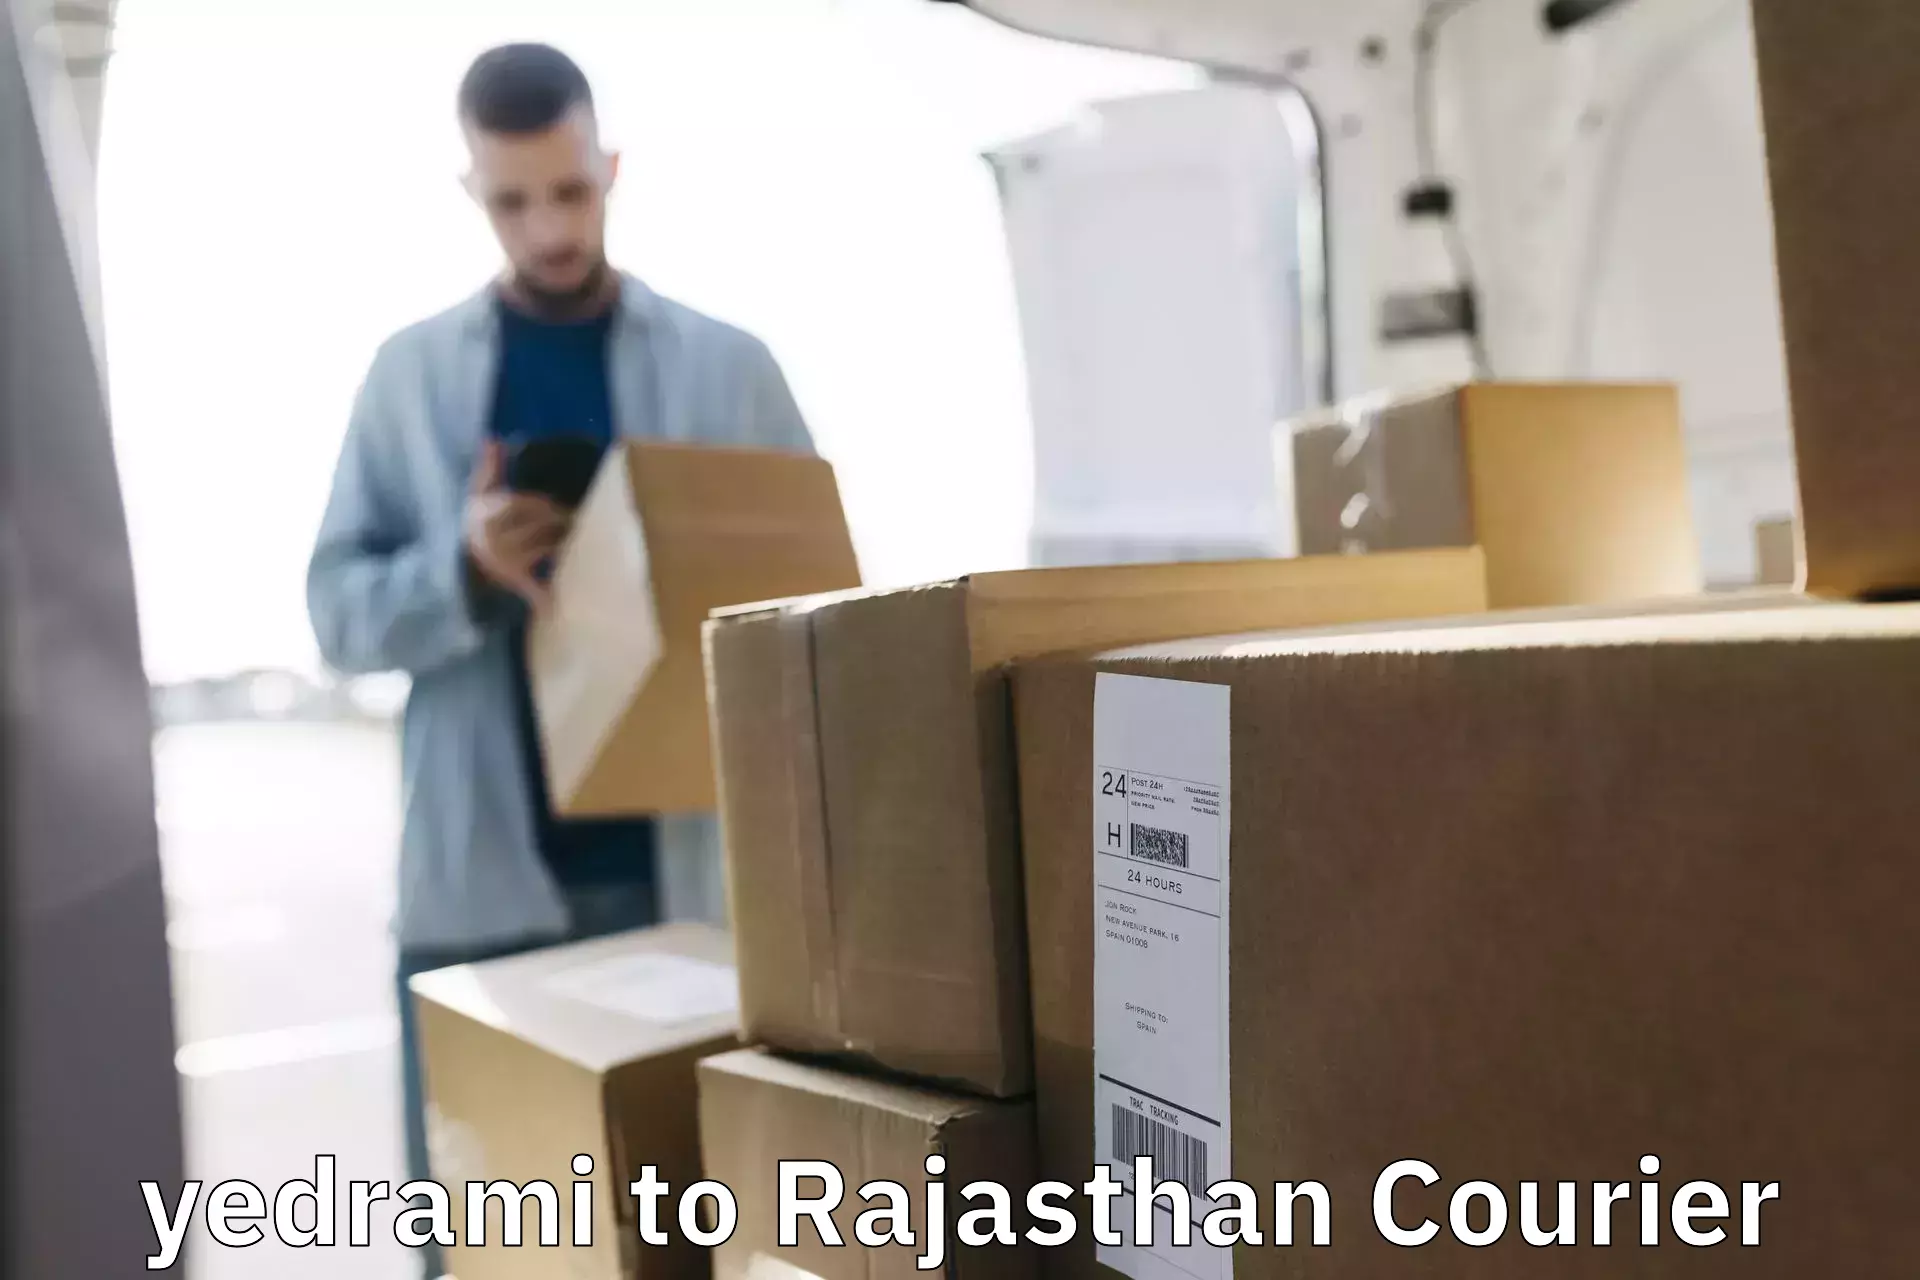 High value parcel delivery yedrami to Bhinmal